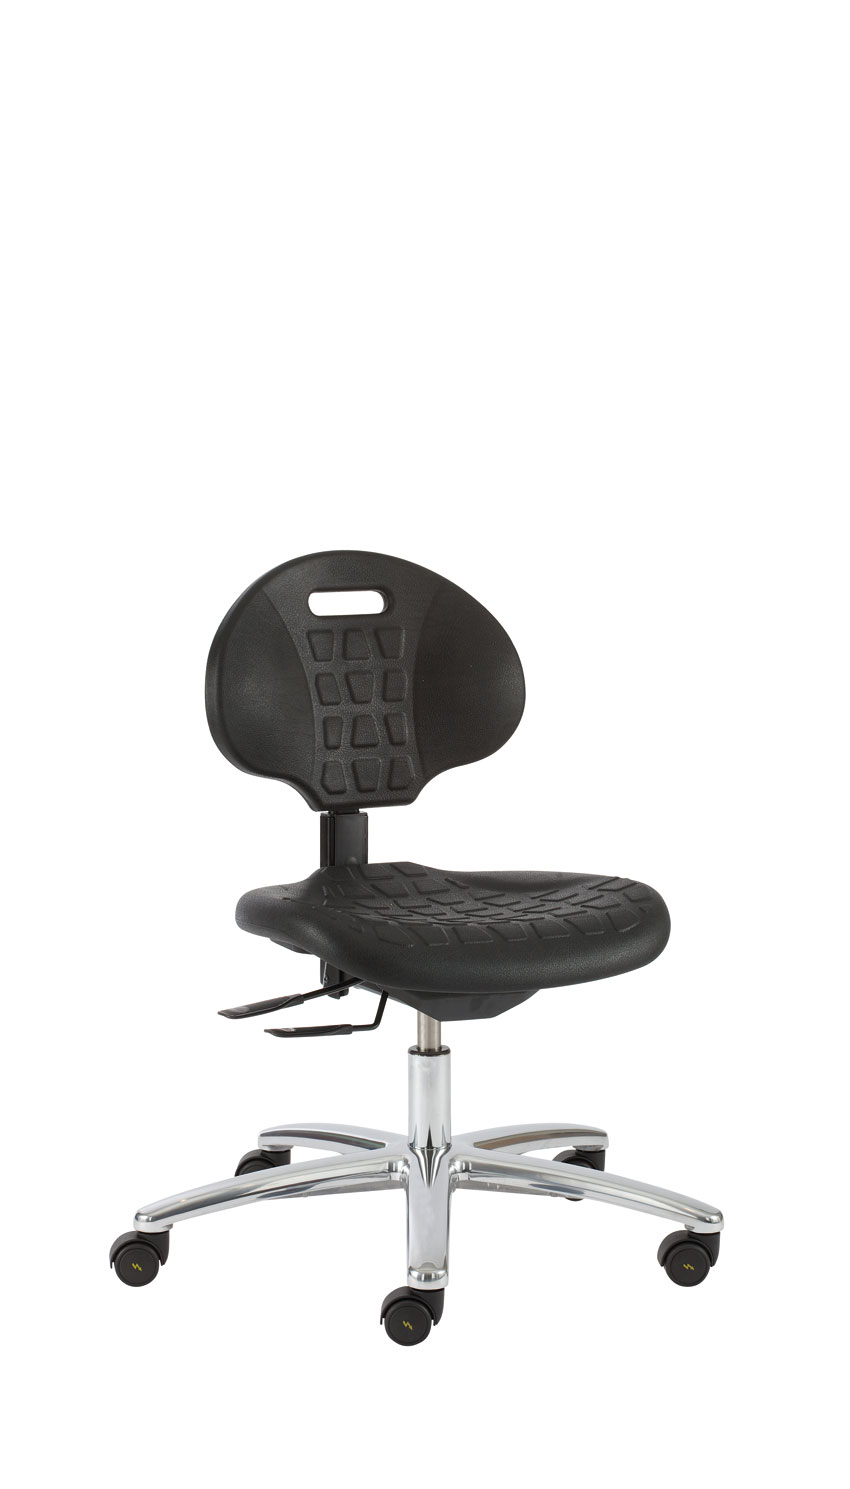 ANTISTATIC  CHAIR ON ESD CASTORS